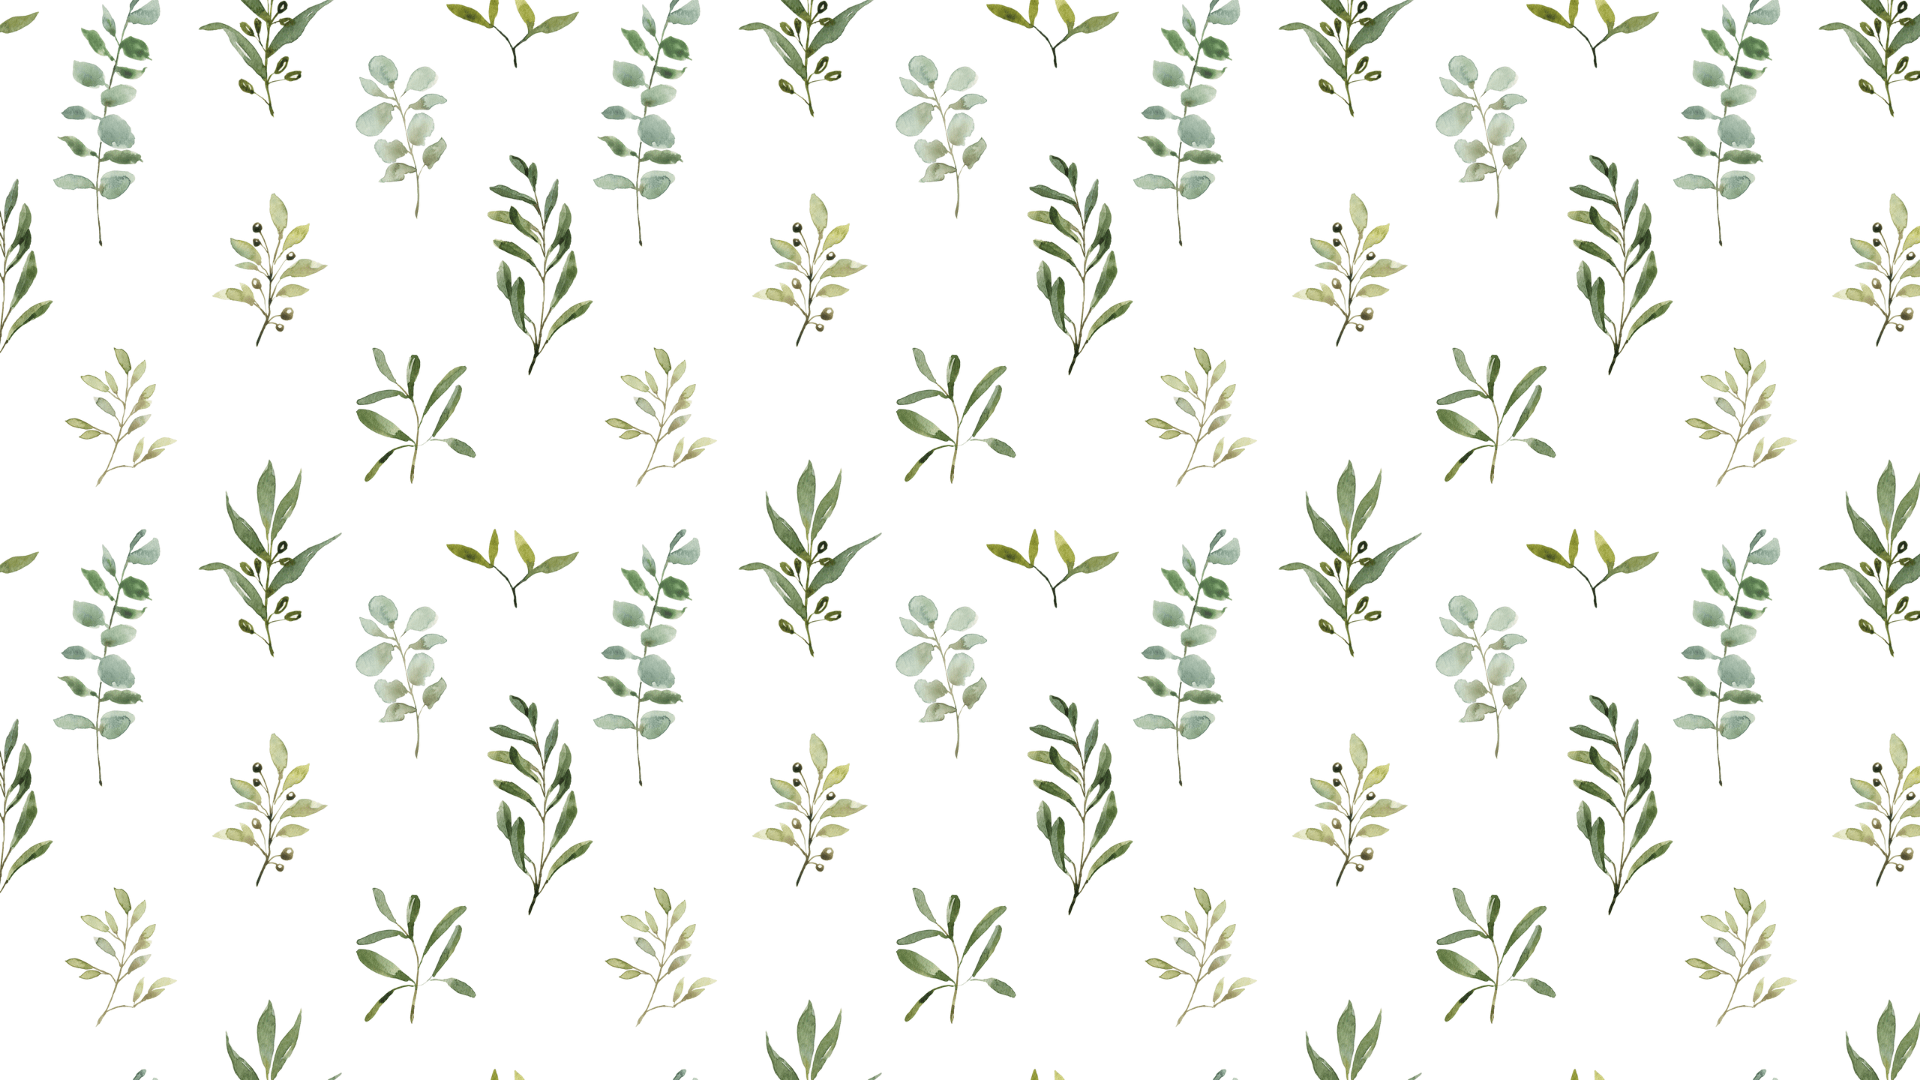 A pattern of green leaves on a white background - Leaves, green, sage green, light green, watercolor